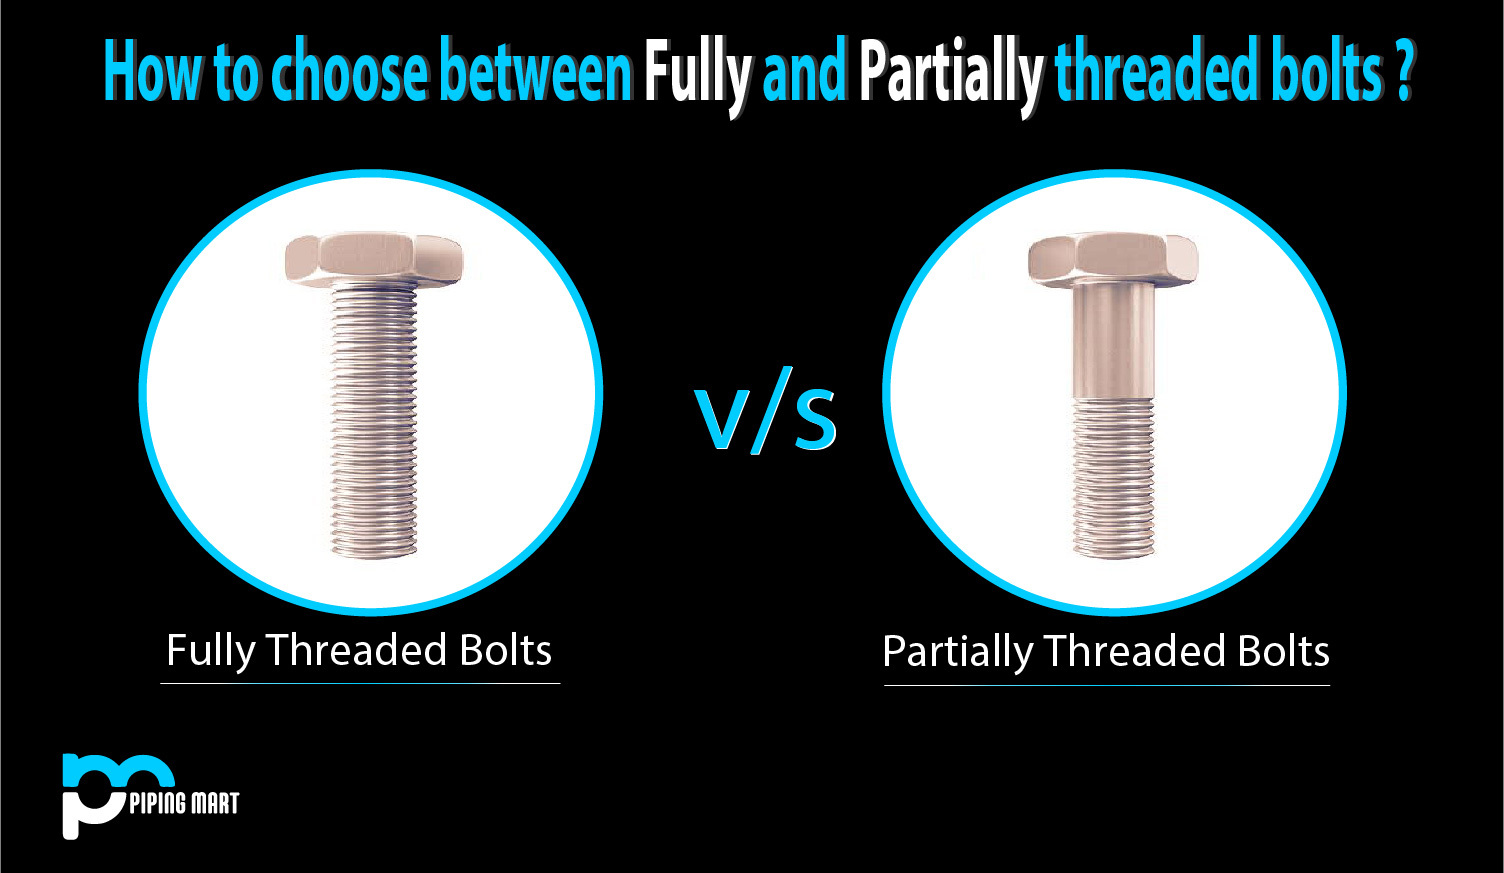 One of the most difficult decisions before buying fasteners is whether fully threaded or partially threaded bolts should be bought. Just simply choosing any one of the two, and using them is not right. You should first be clear with your reasons for getting the fasteners in the first place.